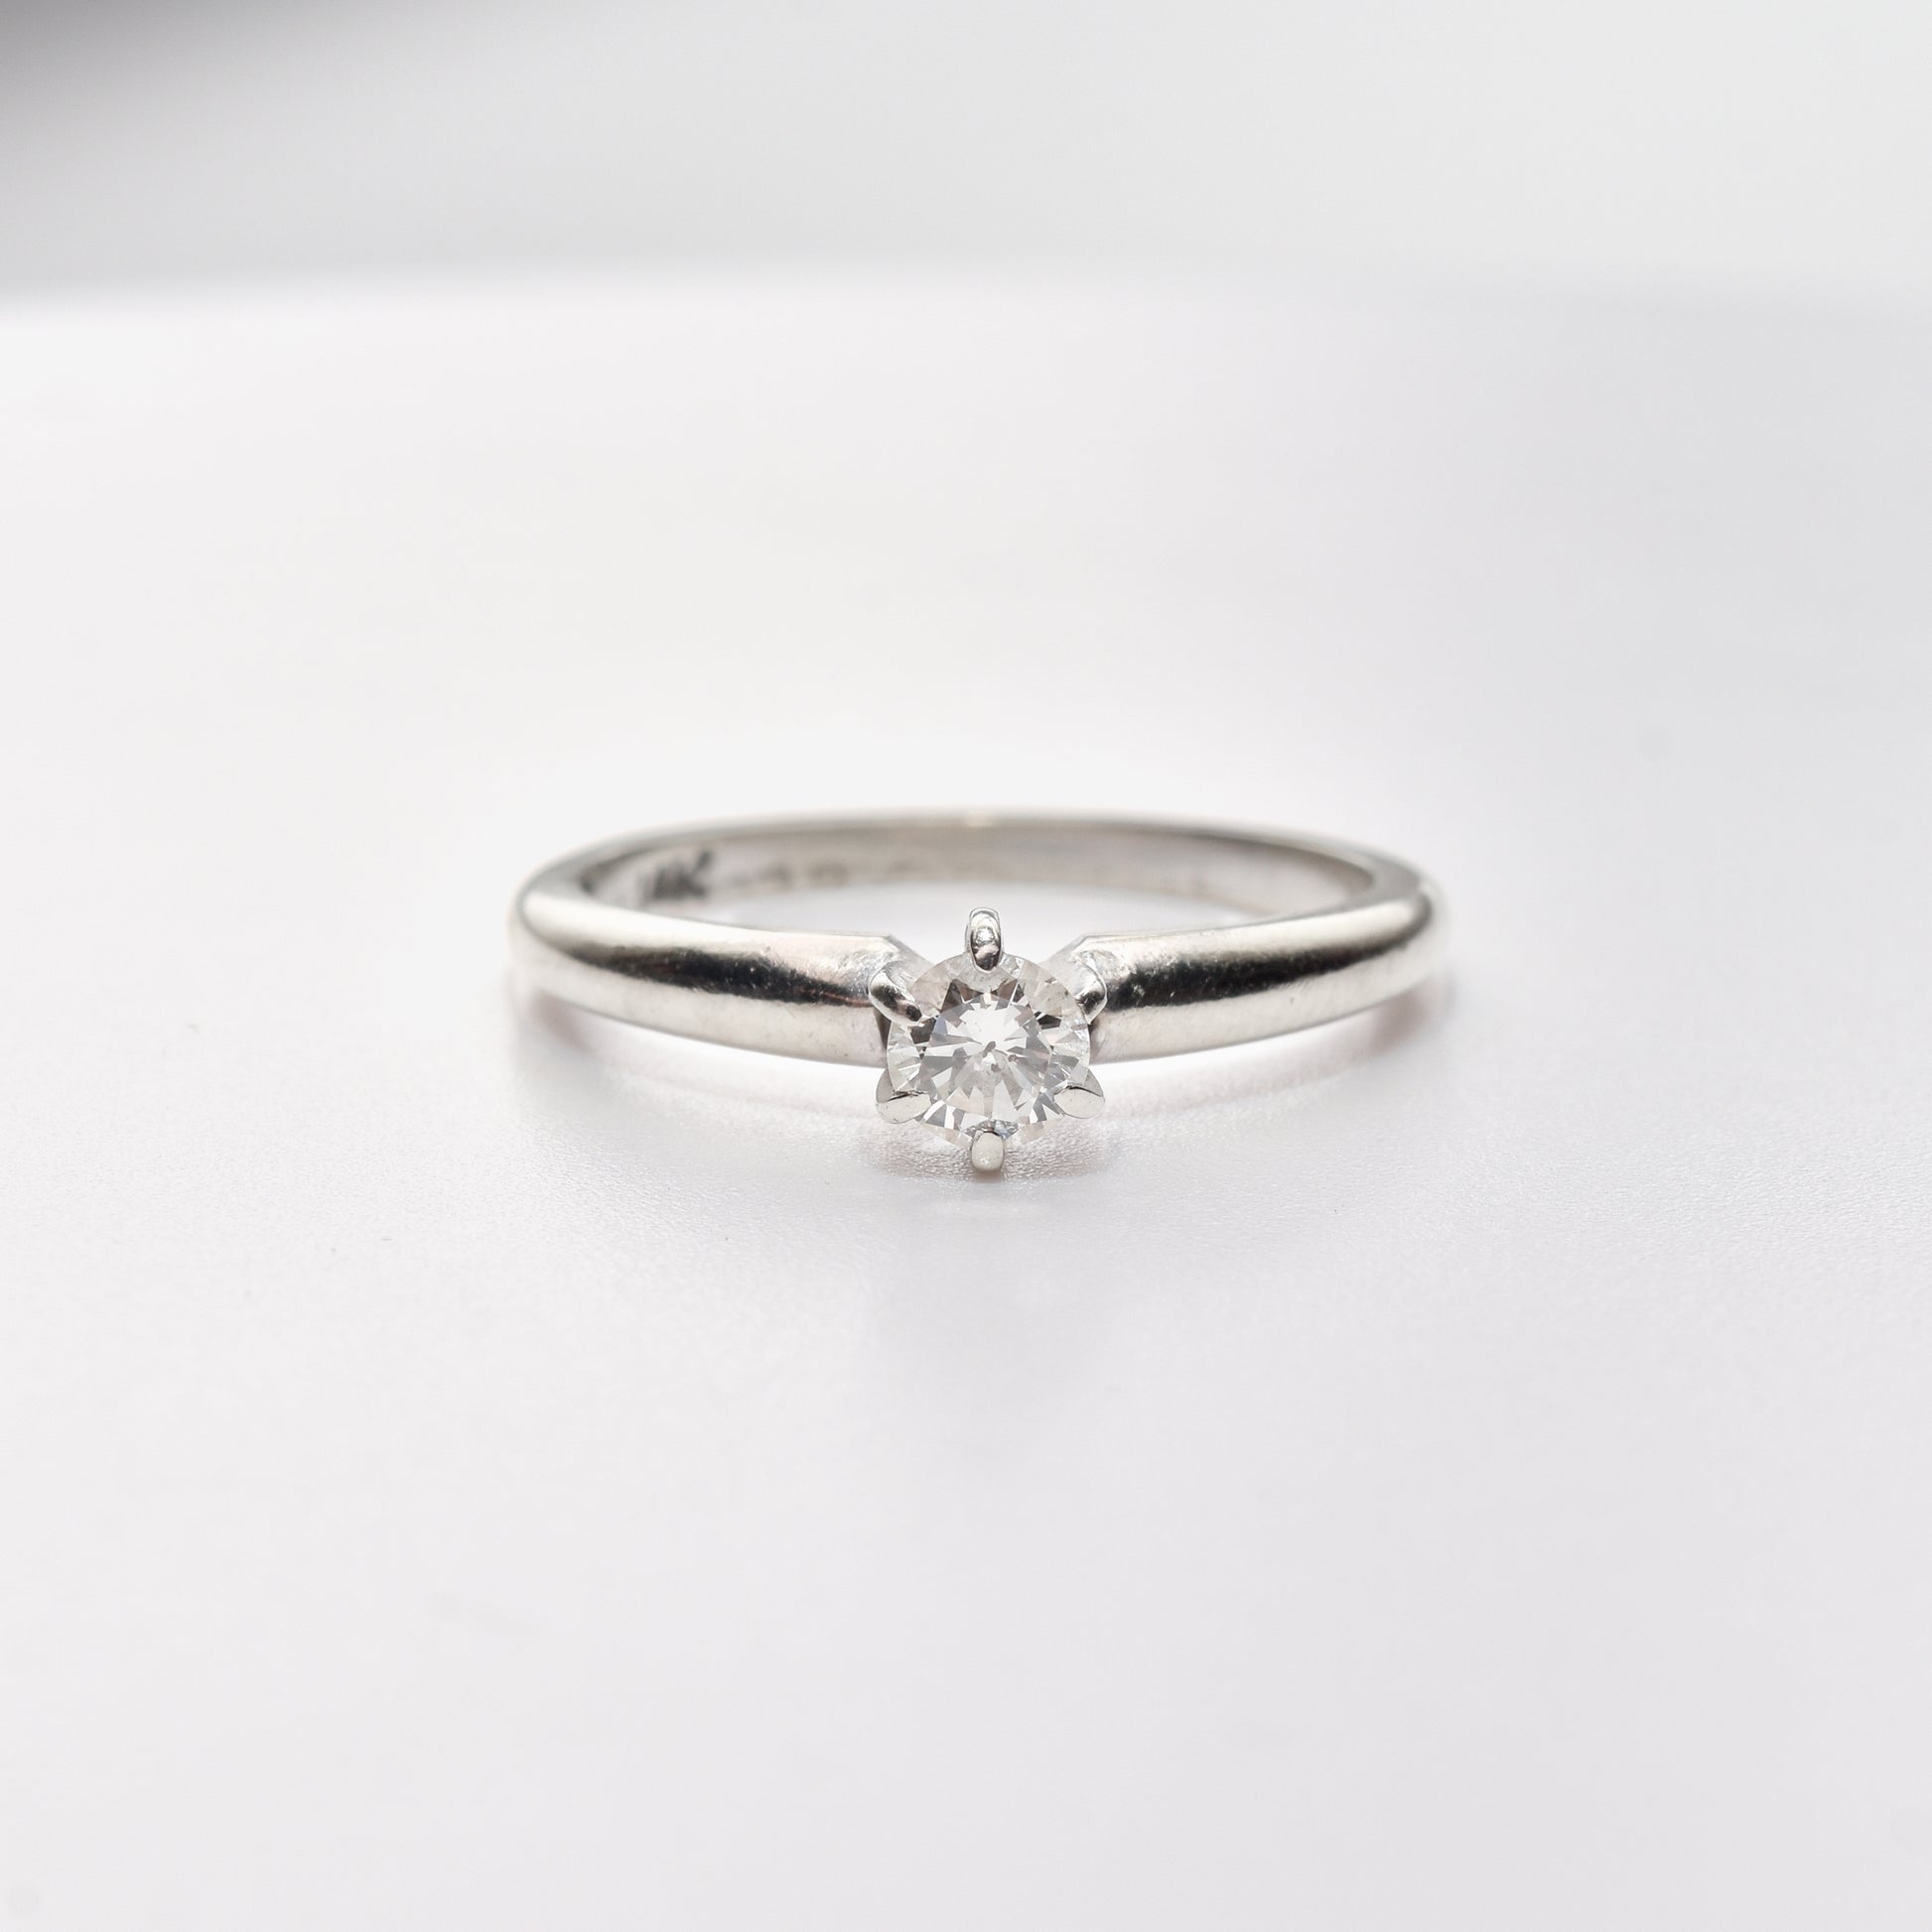 Minimalist 14K white gold diamond engagement ring featuring a .25 carat brilliant solitaire, size 6.25 US, on a white background.